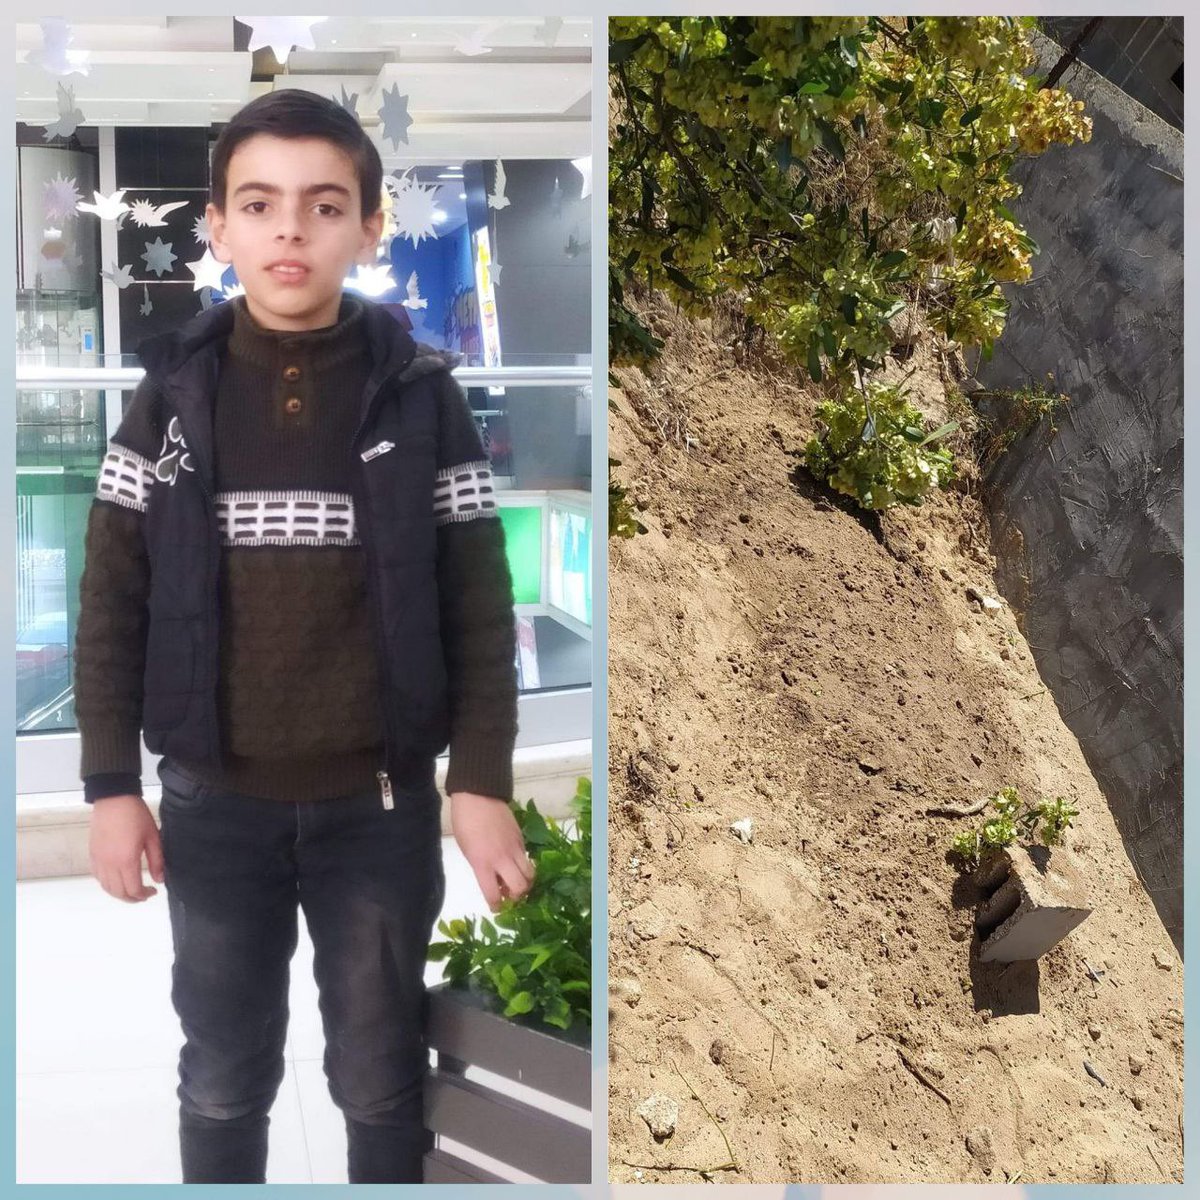 🚨Breaking: After 82 days, the body of a child Ahmed Samour, was found near the Japanese neighborhood in Khan Younis southern #Gaza Strip . It was concealed by the Israeli army. He was shot by a sniper on Trans Street while leaving Nasser Hospital on January 24.